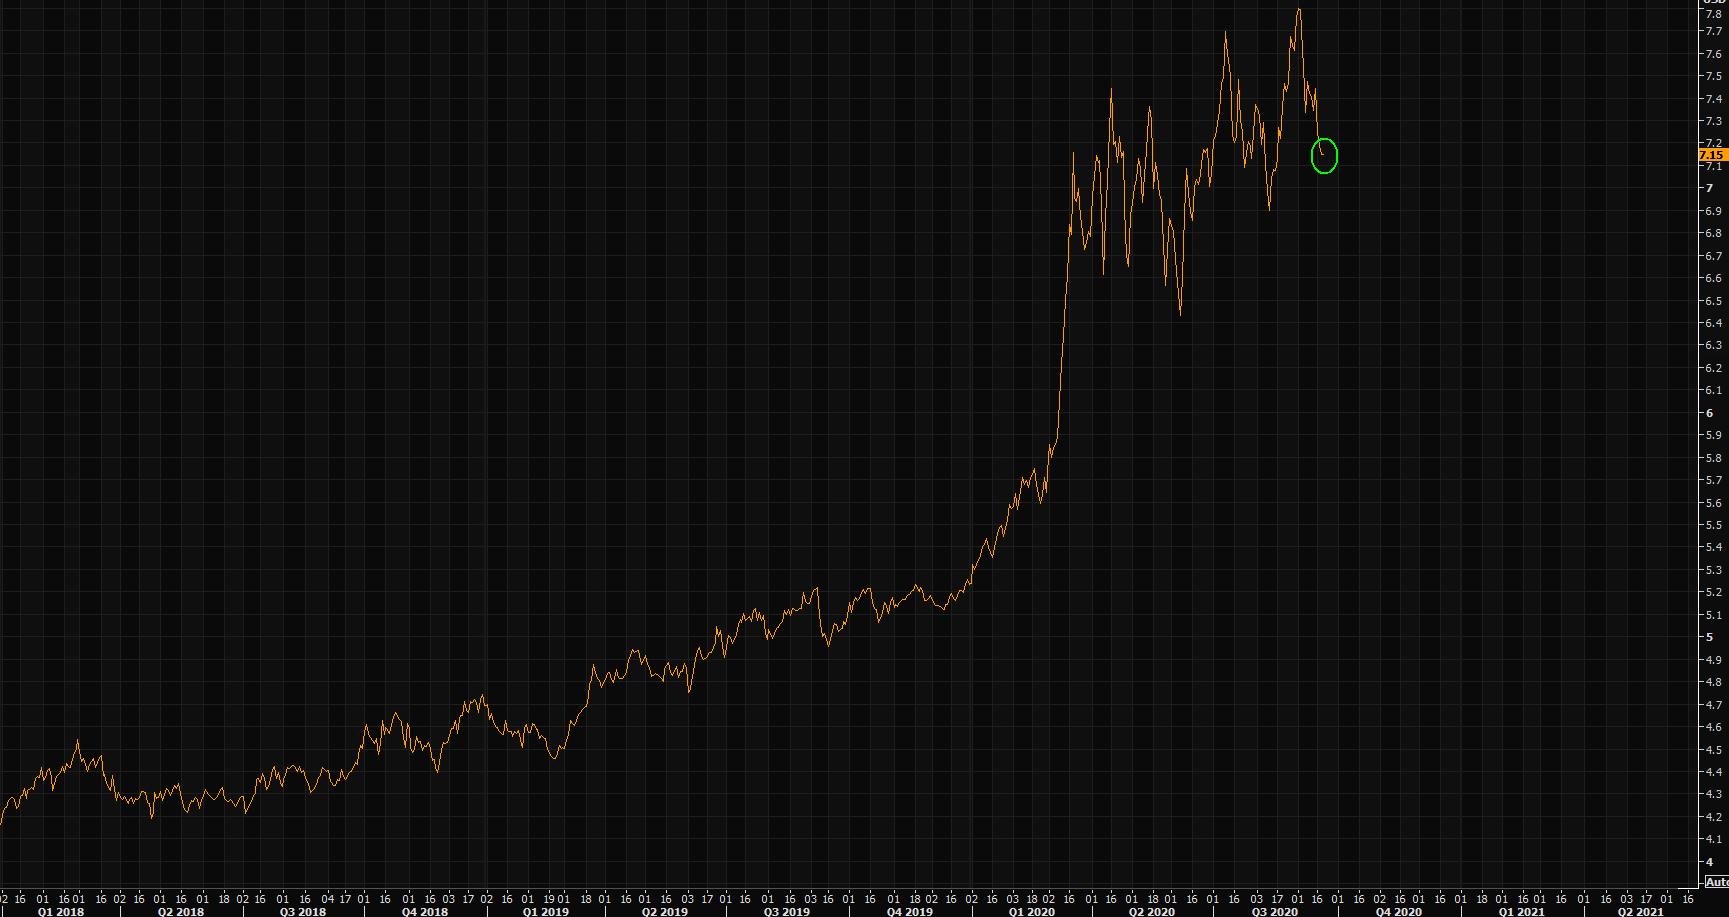 NASDAQ vs Russell - it has done this before